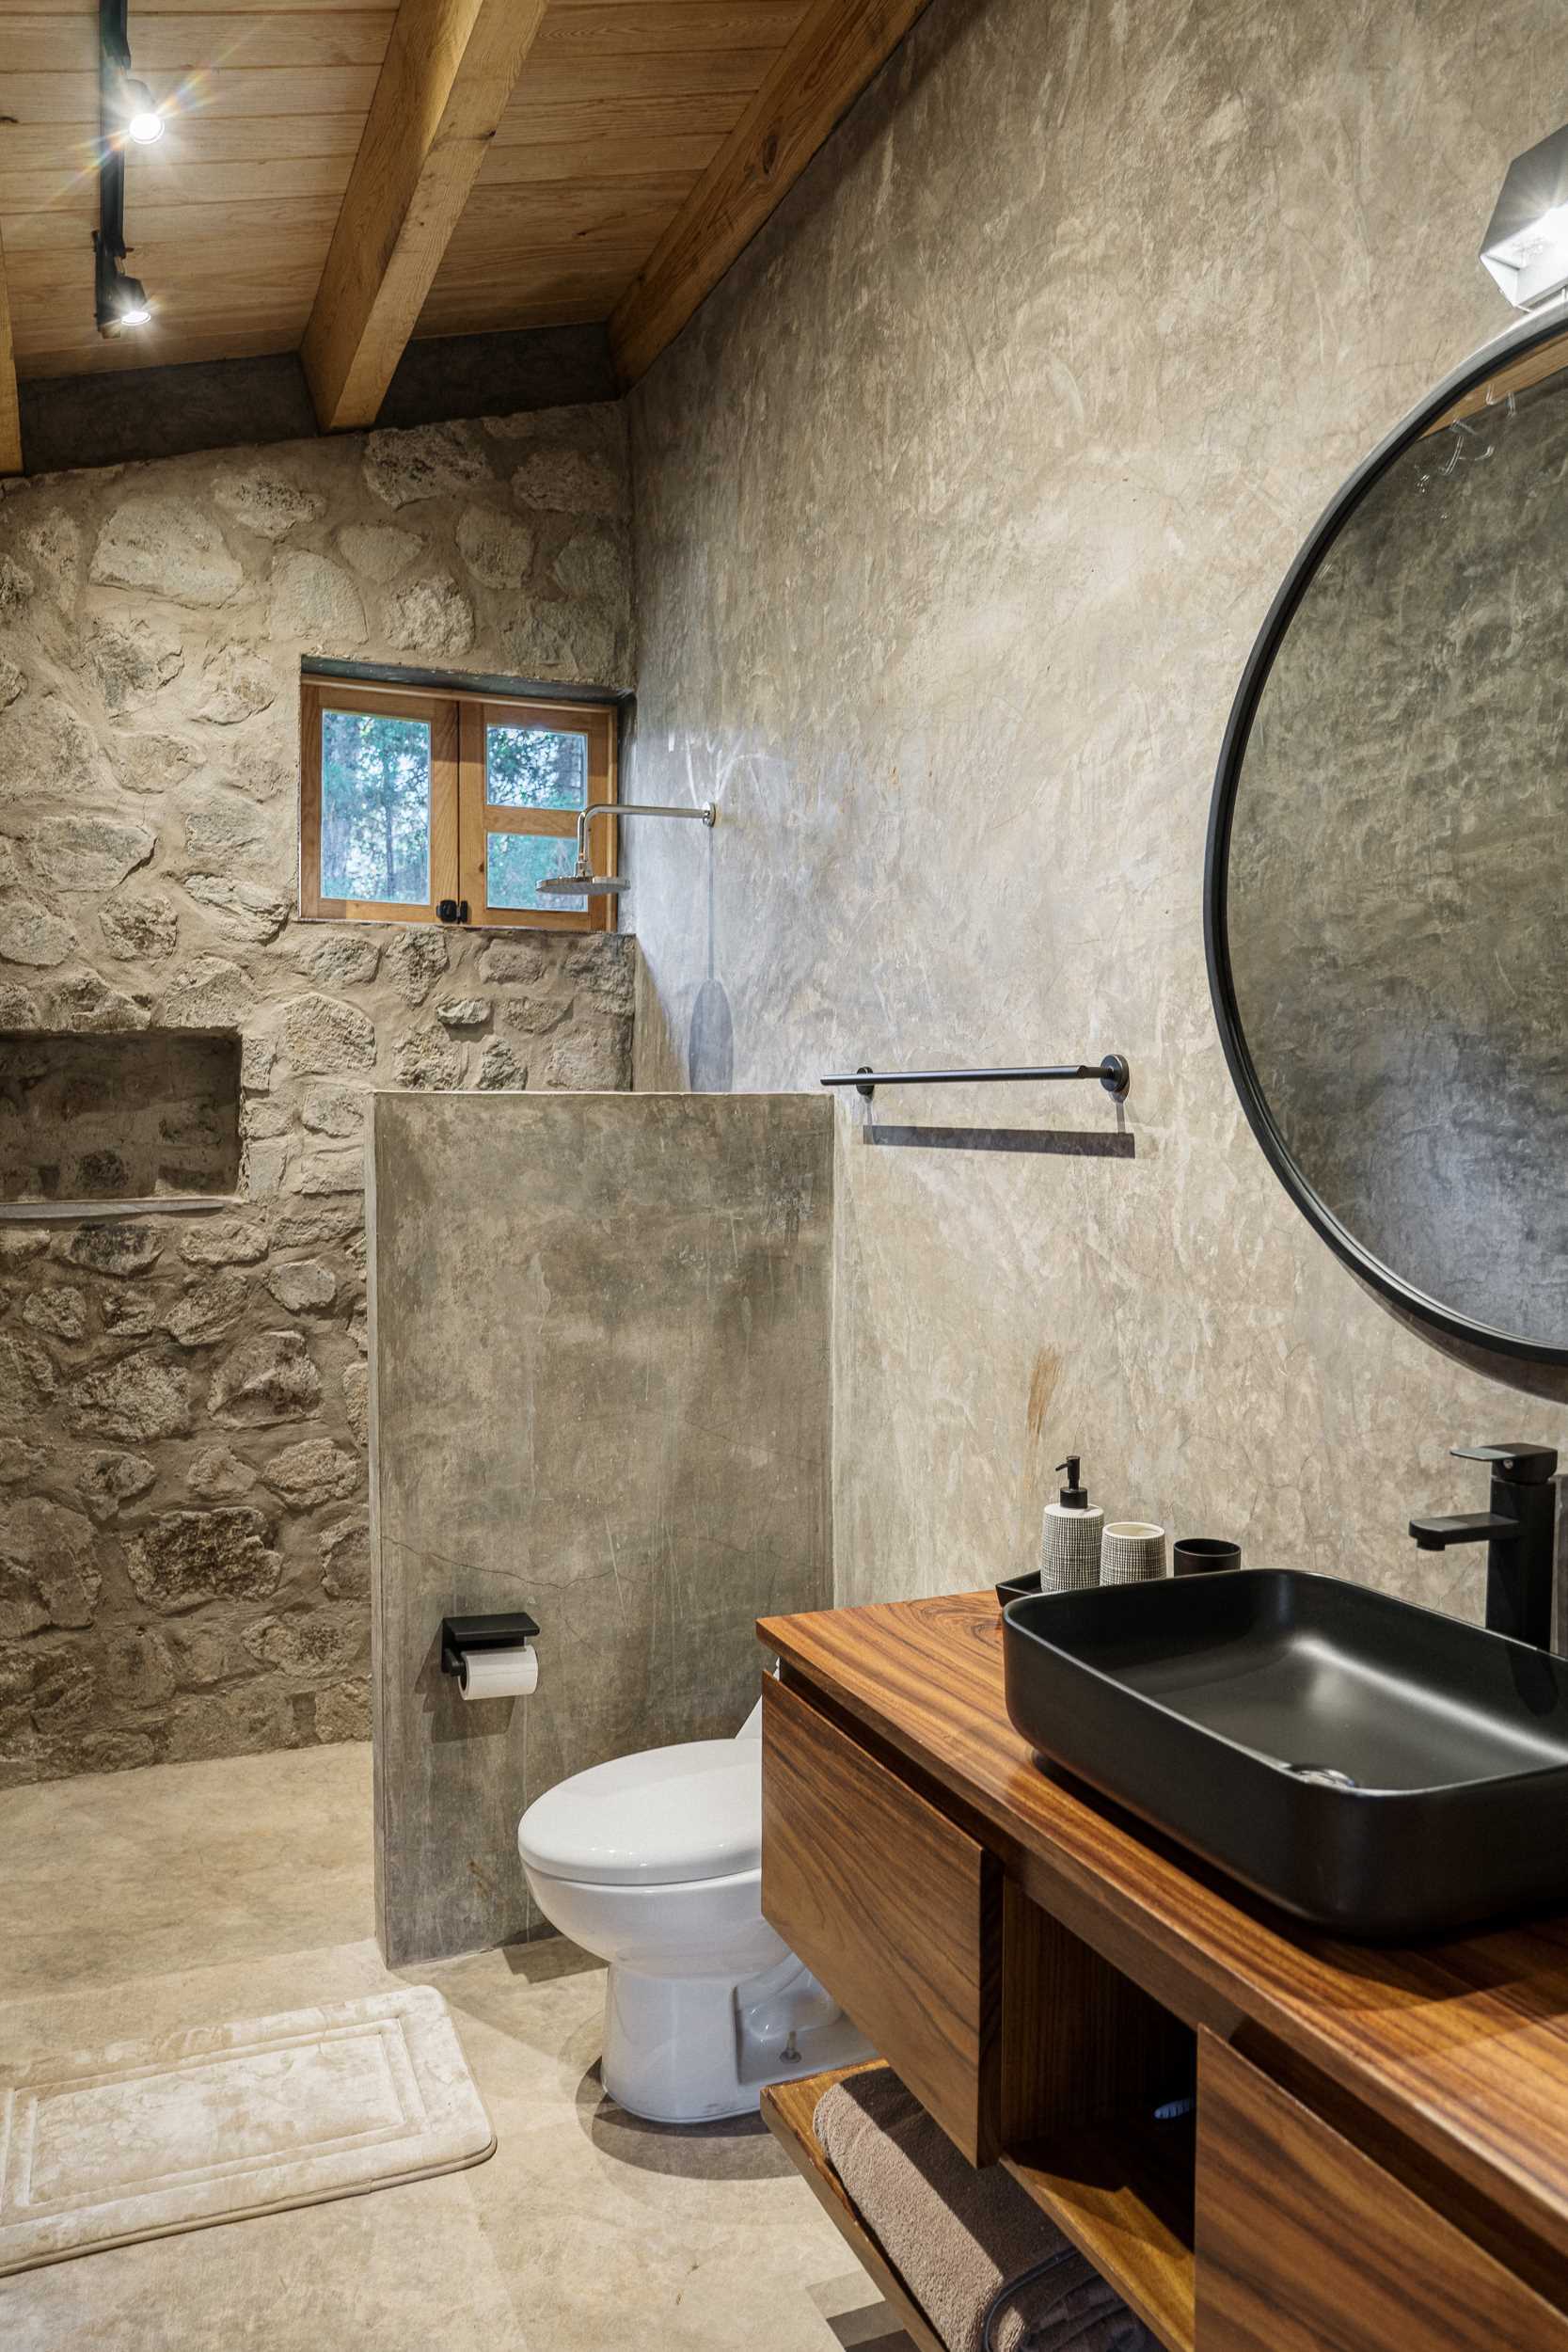 A modern stone and wood bathroom that includes a partial wall that separates the shower from the rest of the space.